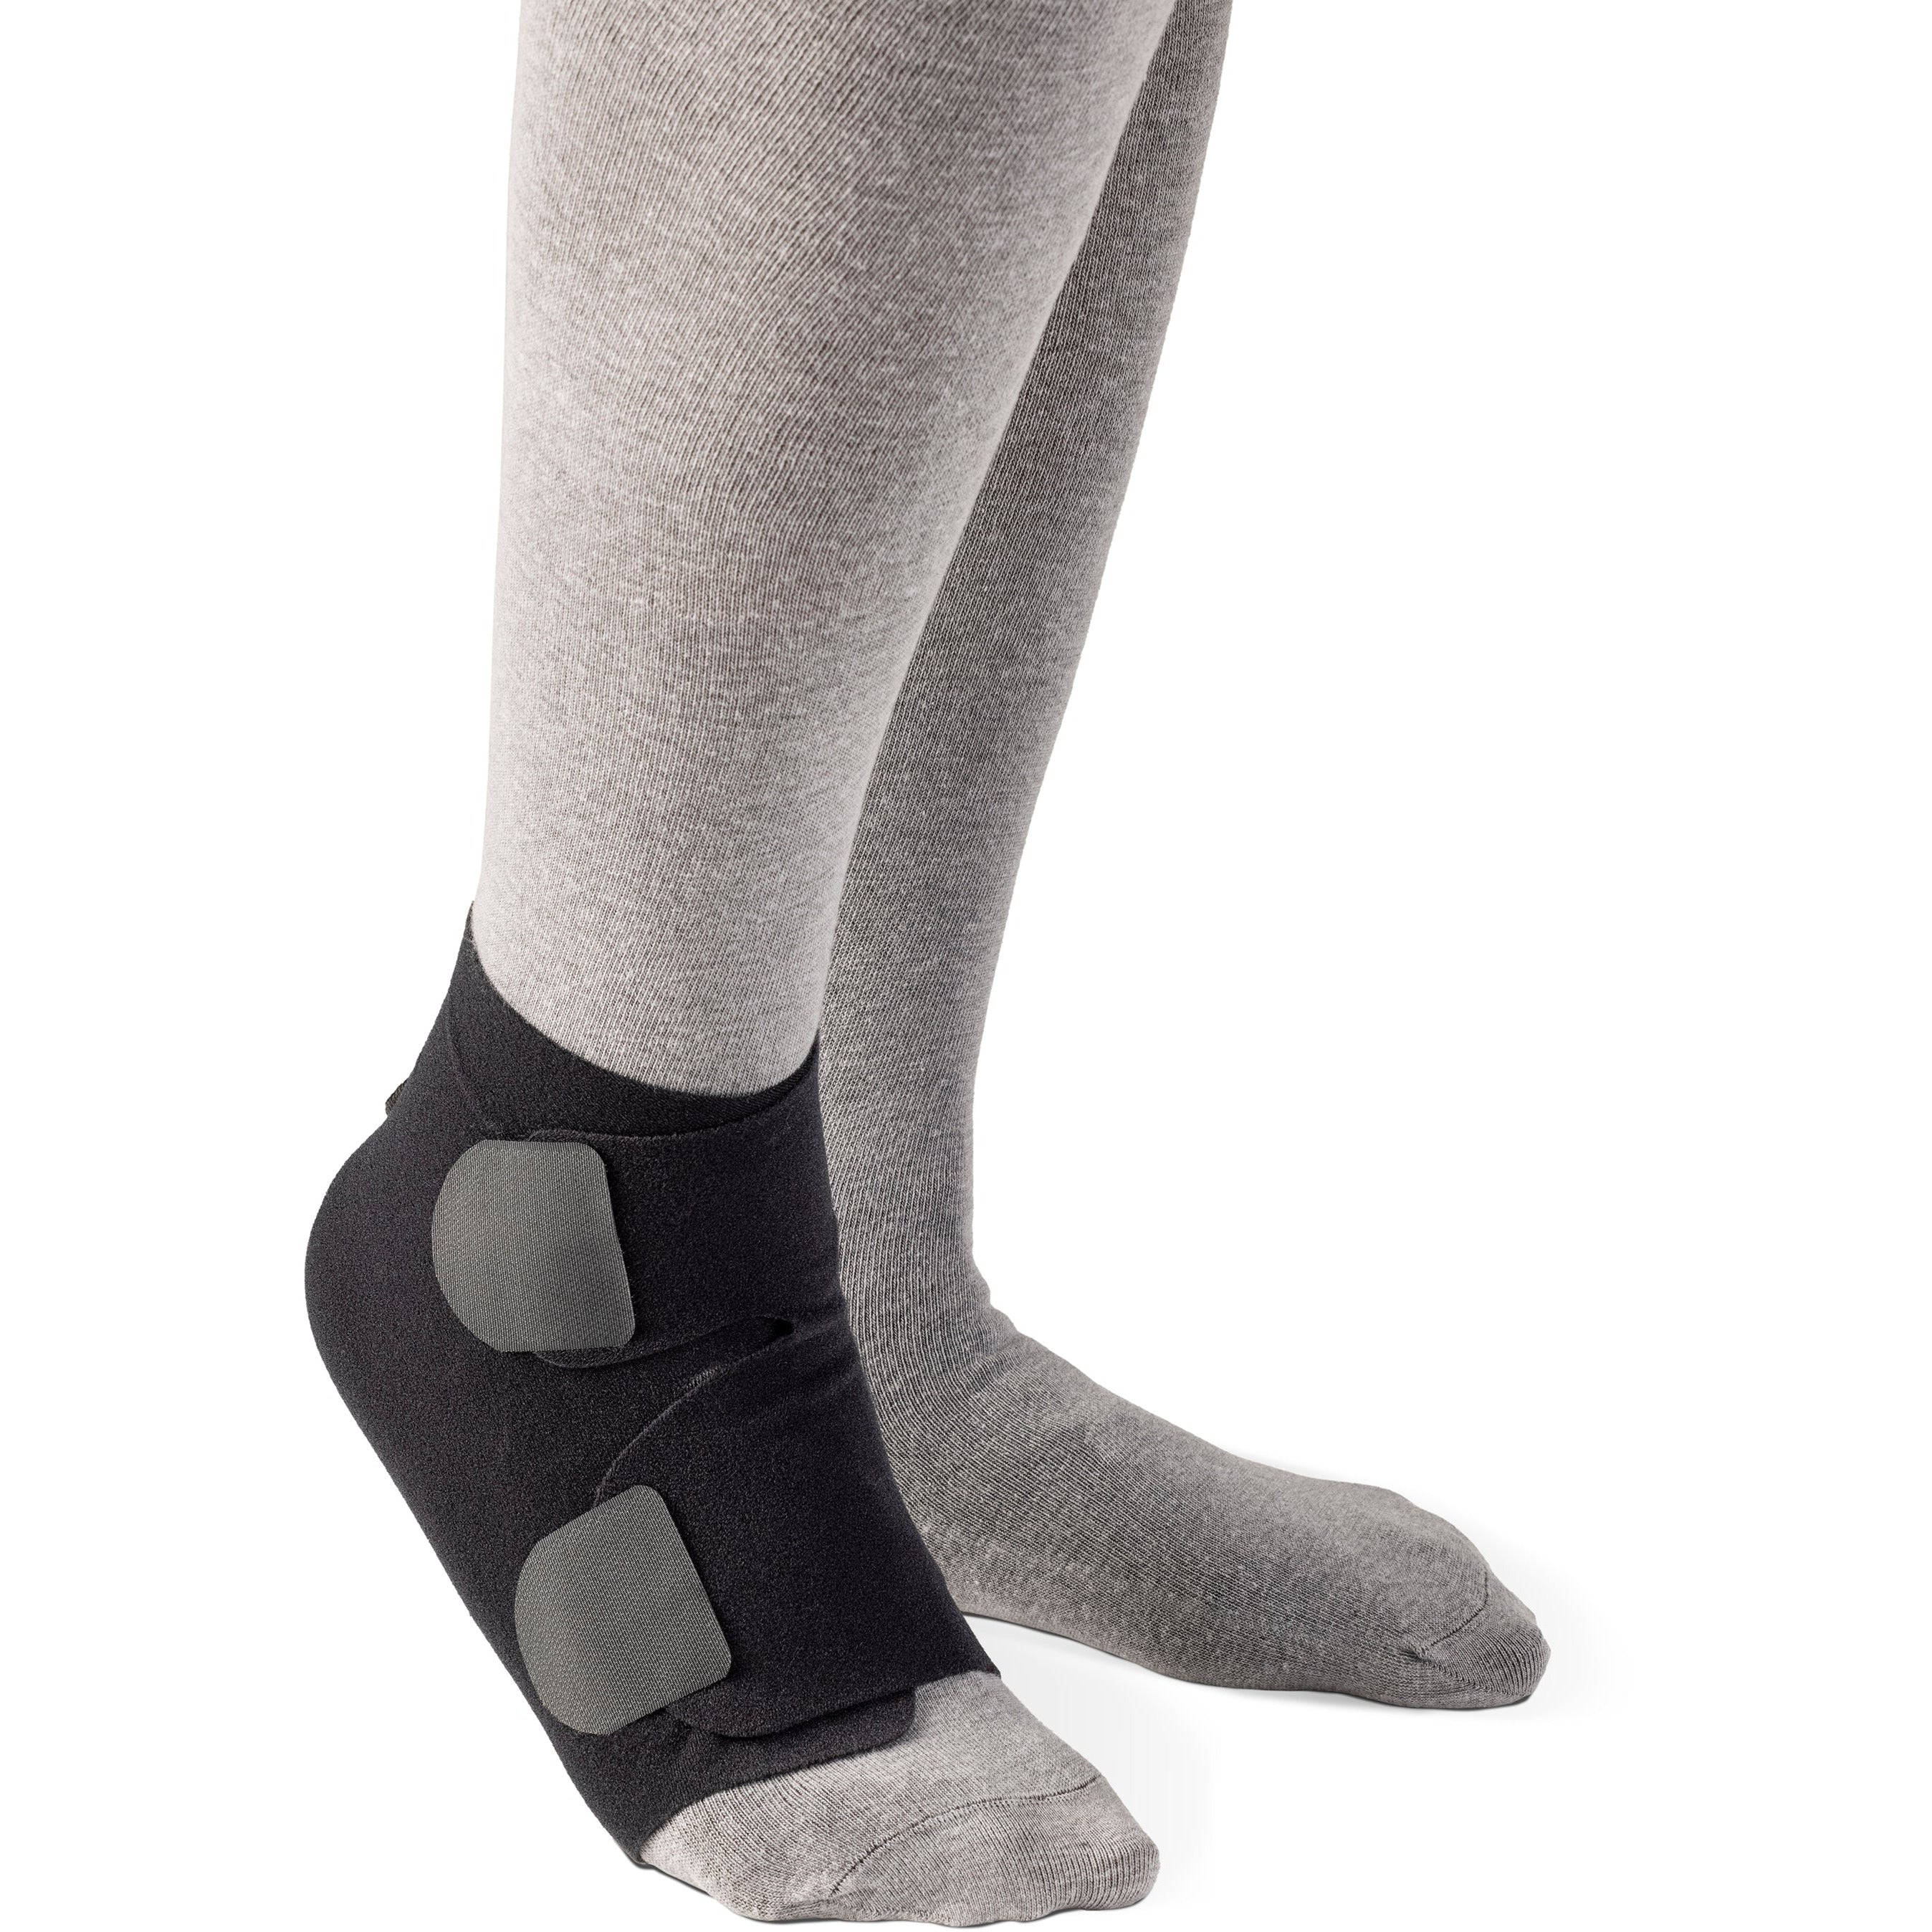 Sigvaris Chipsleeve Standard Calf & Foot – Compression Store